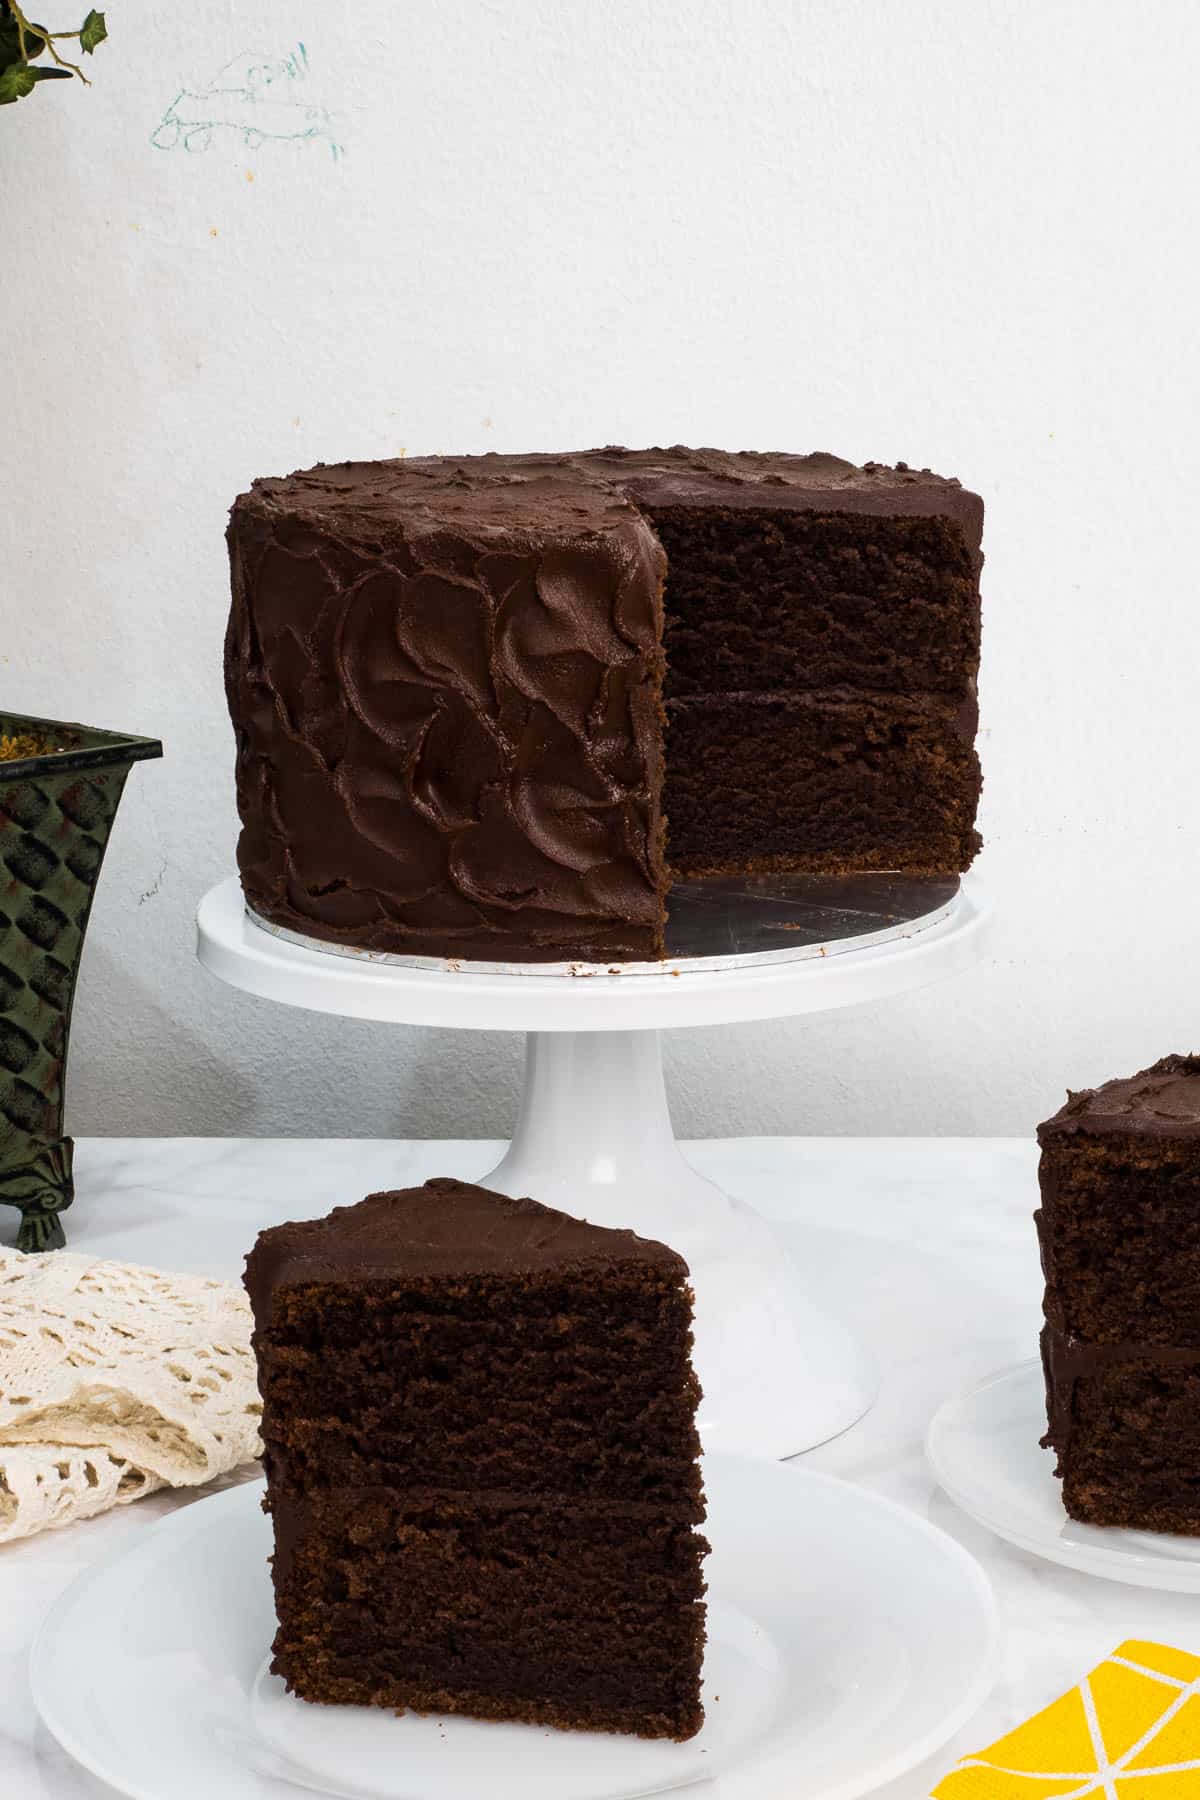 A chocolate cake on a white stand with a portion cut out and 2 slices of the cake on white plates on the front and side.